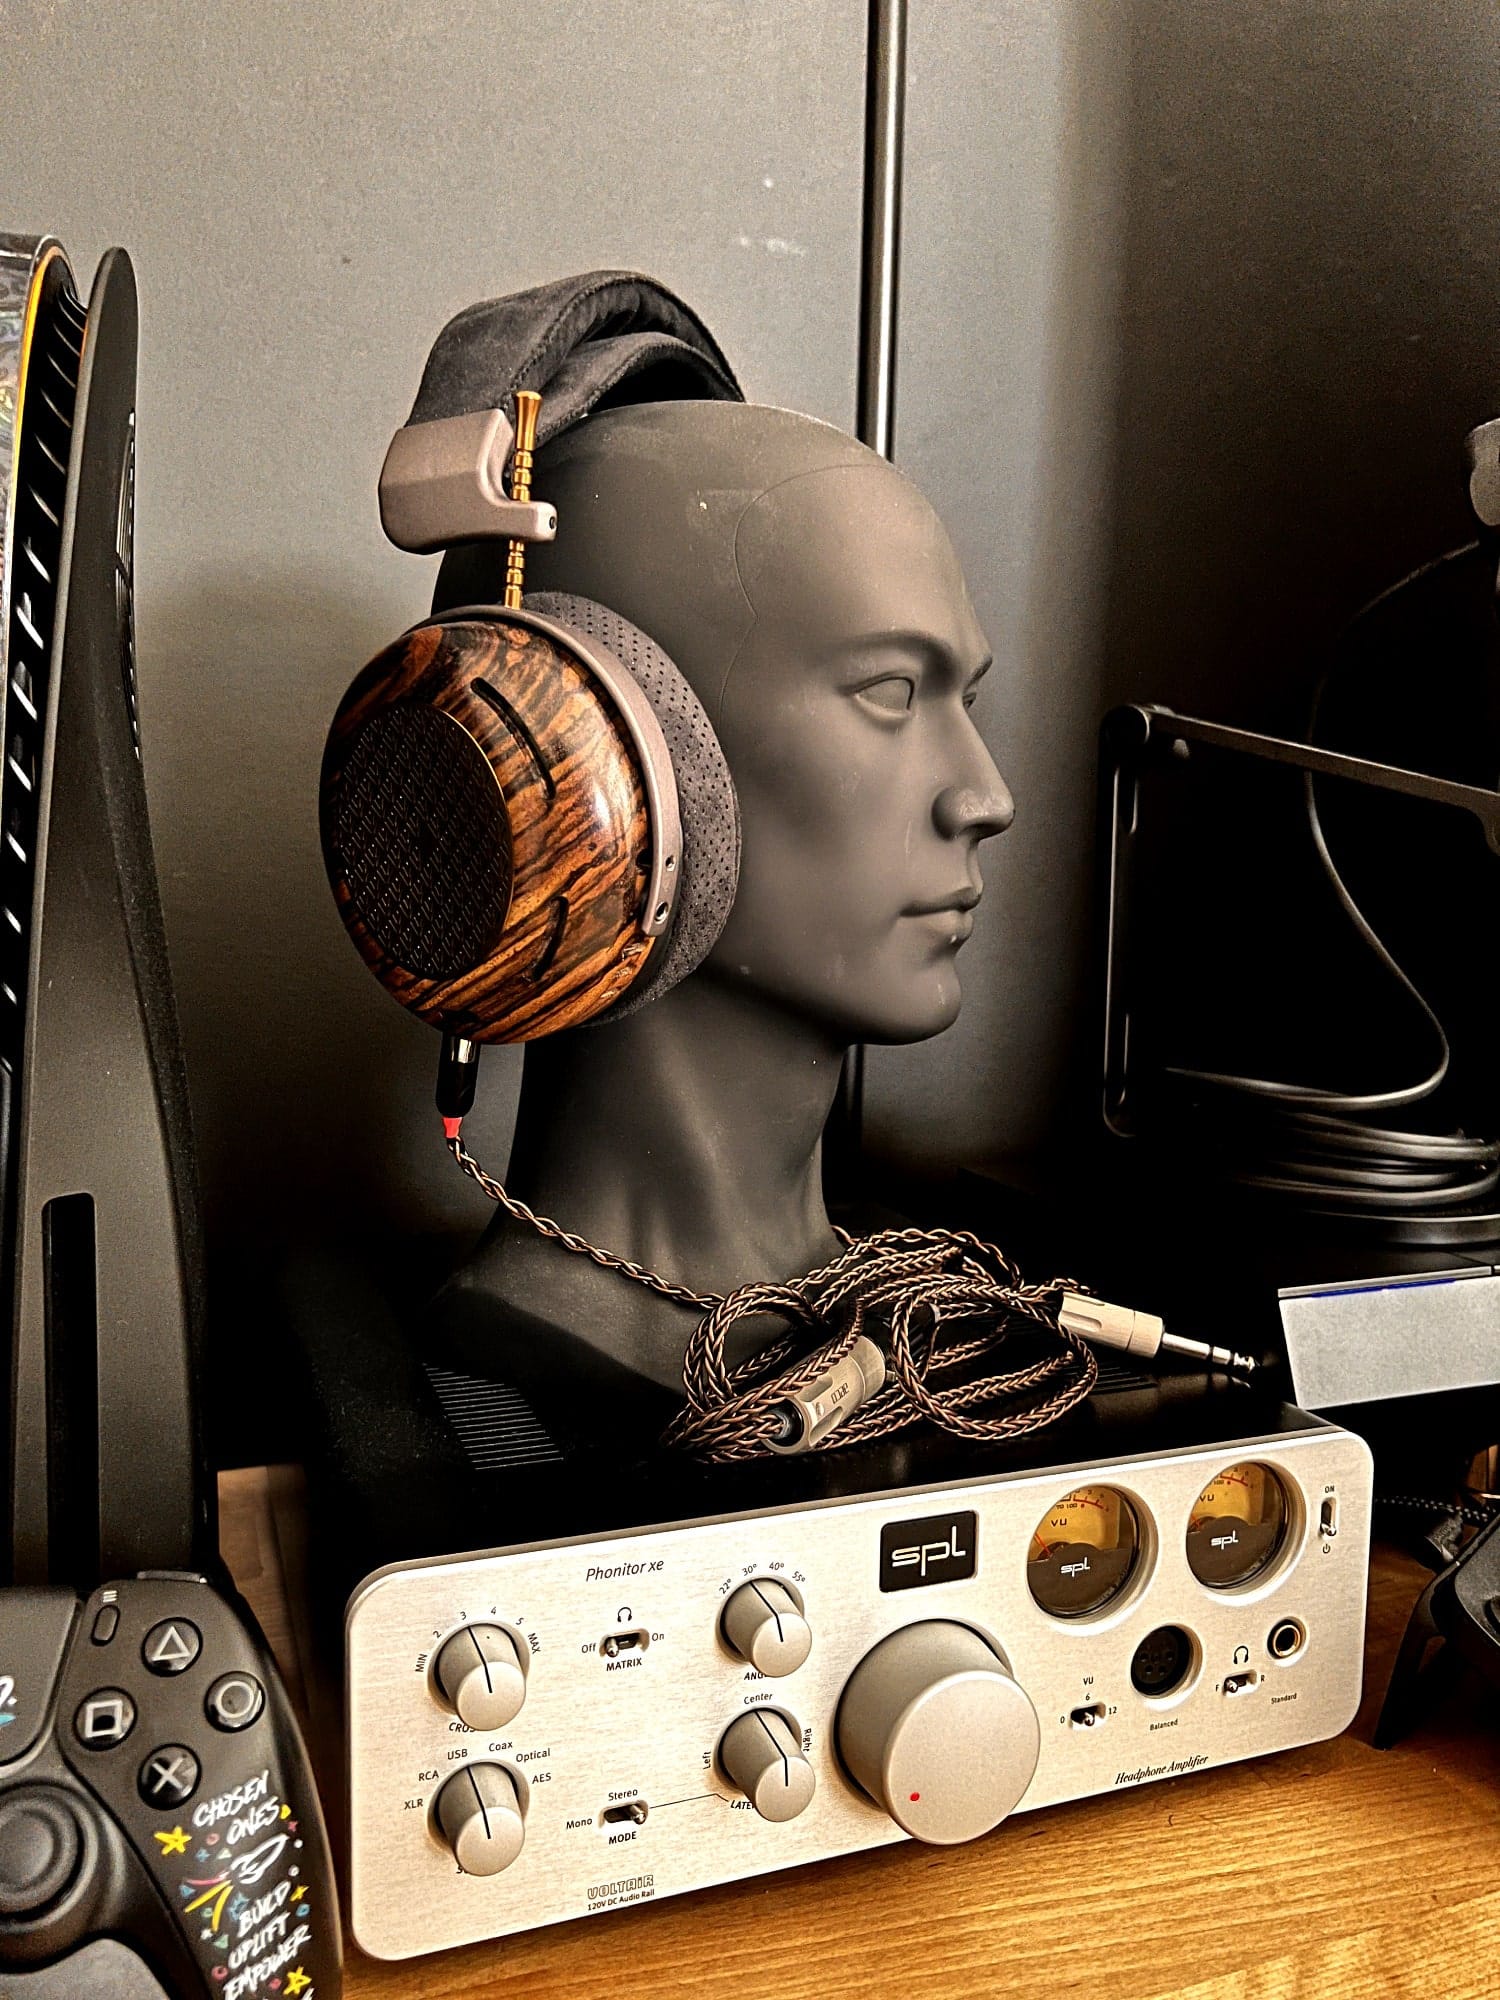 A close-up of a wooden-cup headphone on a mannequin head next to the Phonitor XE headphone amplifier and a gaming console controller in the foreground